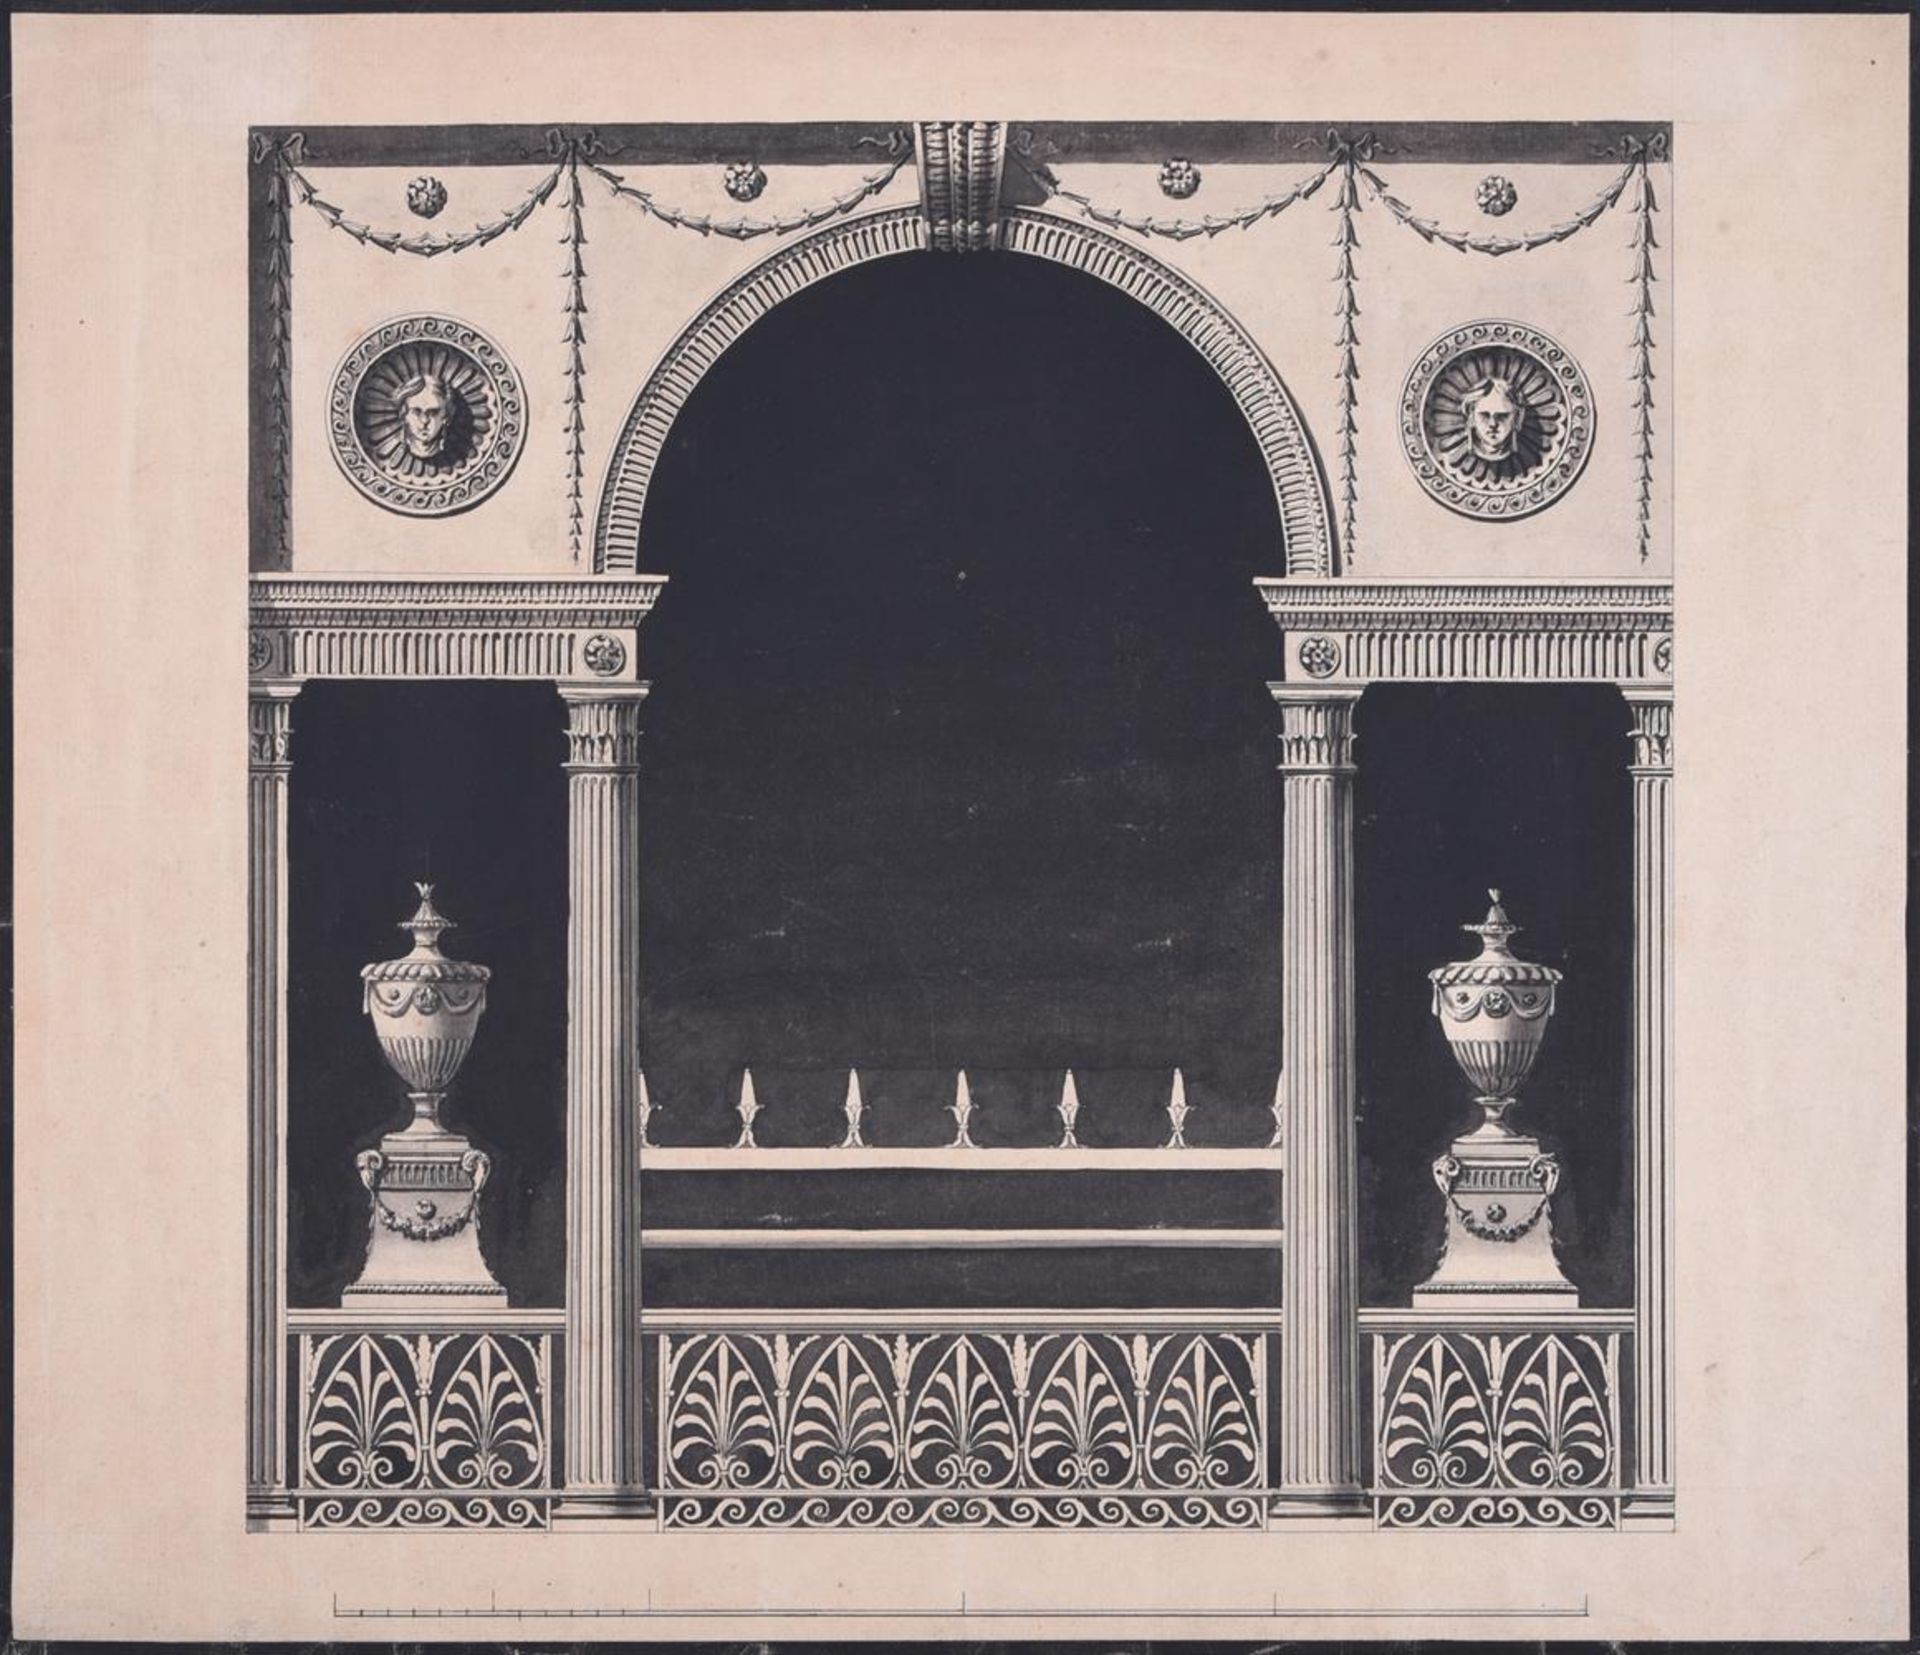 ENGLISH SCHOOL (LATE 18TH CENTURY), DESIGN FOR A MONUMENT - Image 2 of 3